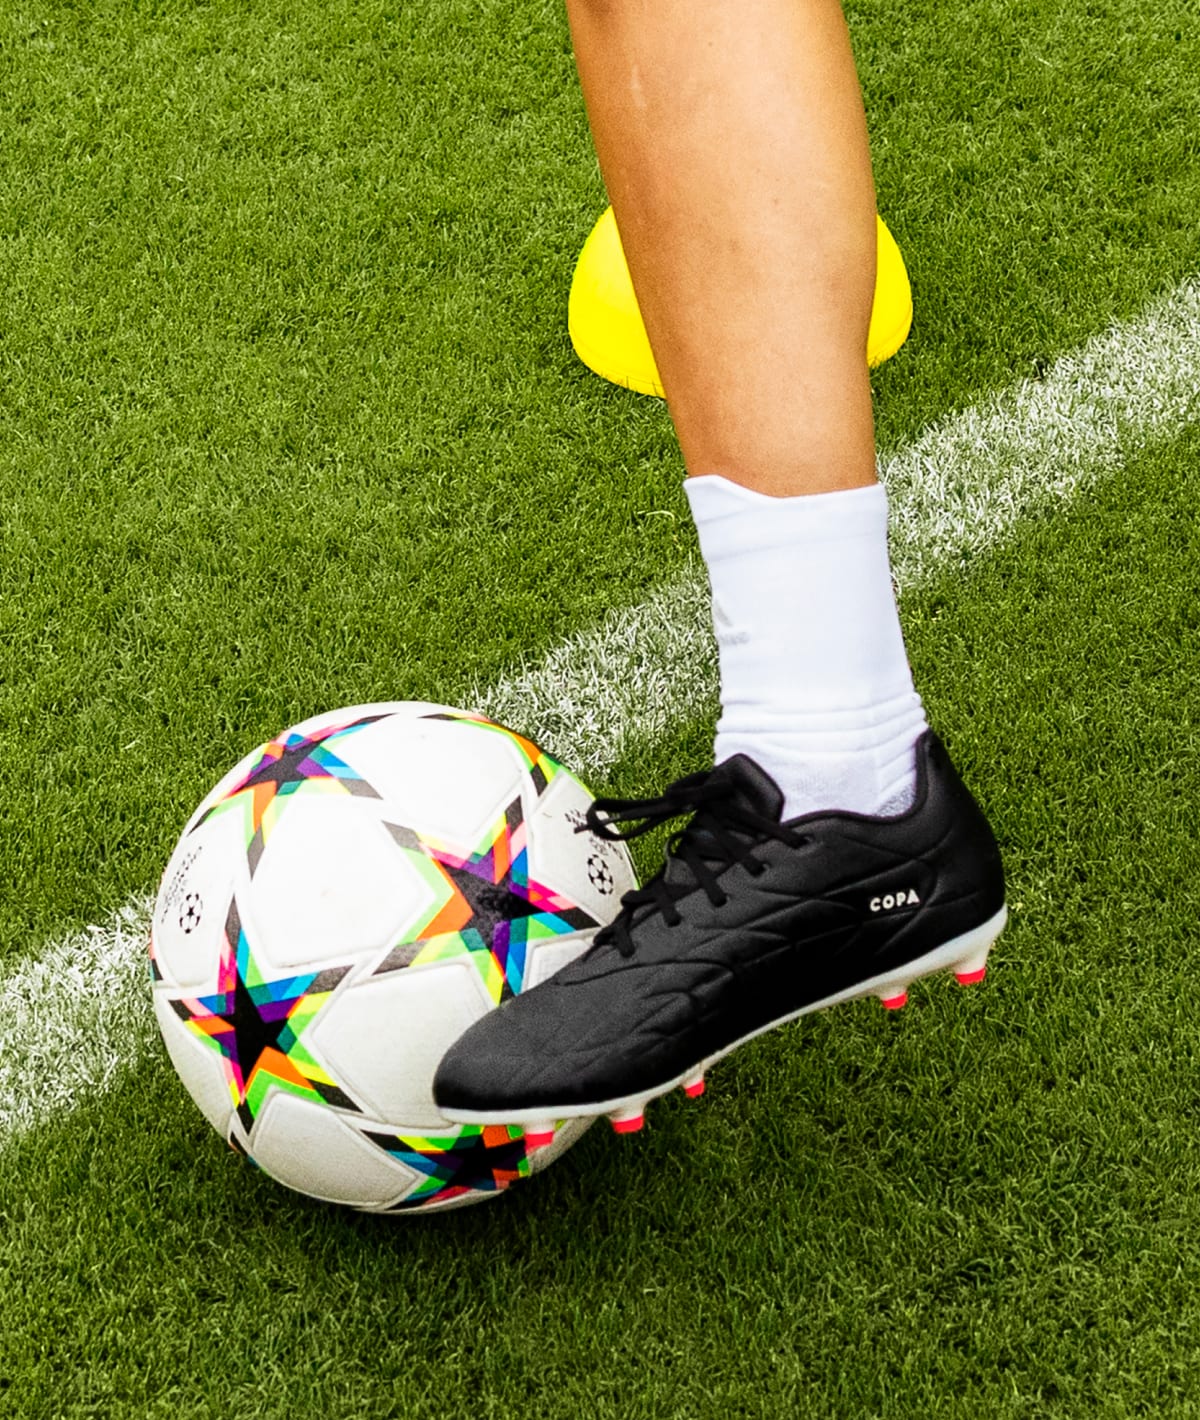 Who Are Ya Soccer? A Comprehensive Guide About The Popular Sport